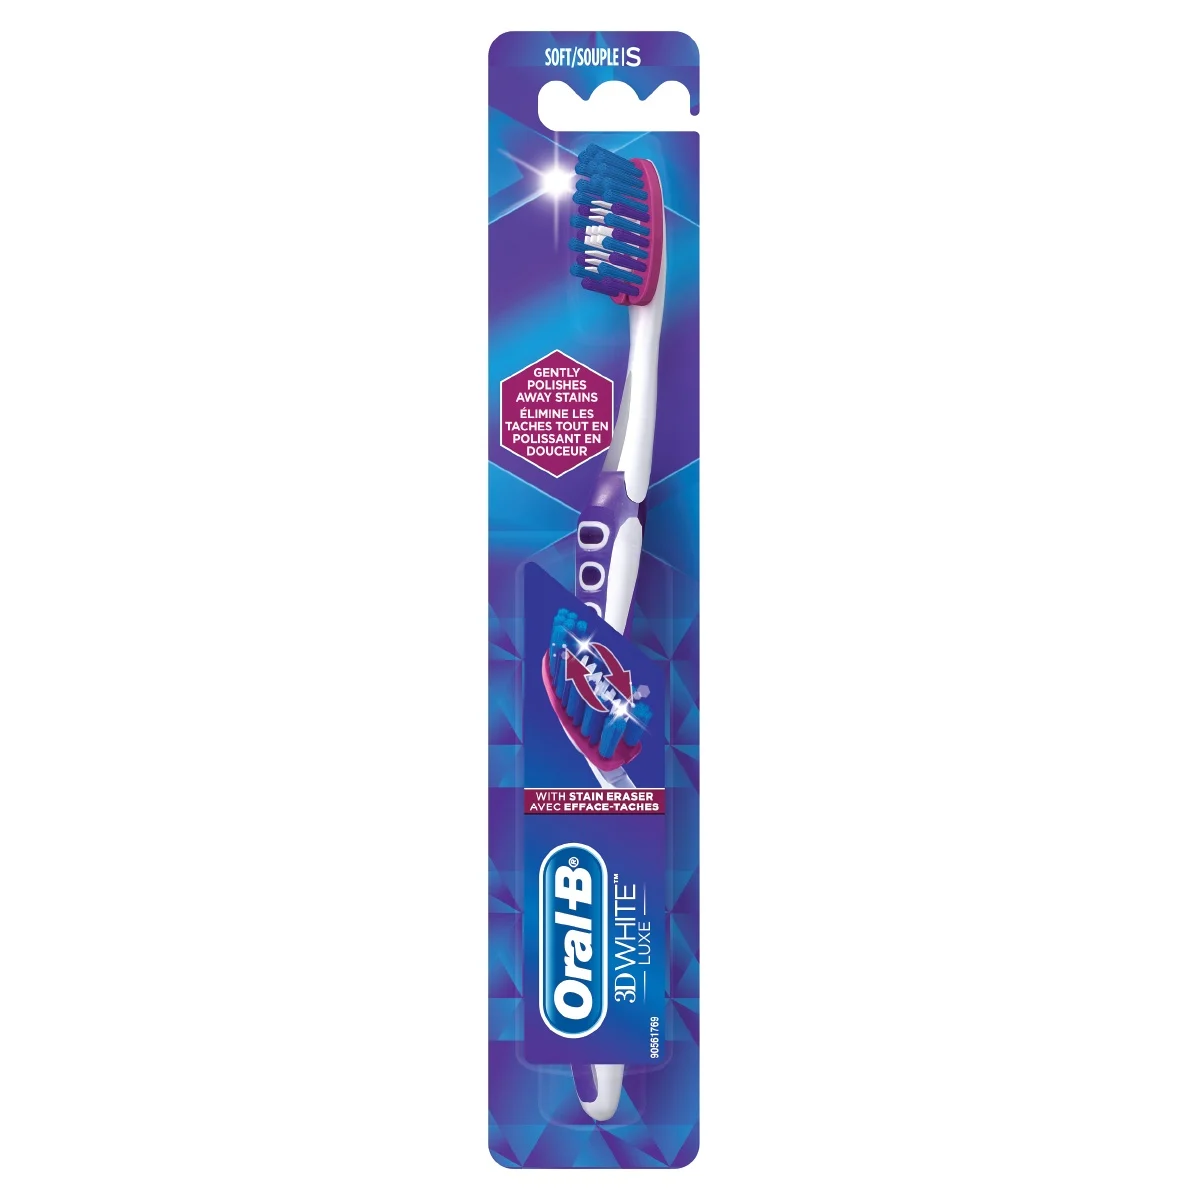 Oral-B 3D White Luxe Pro-Flex Manual Toothbrush 